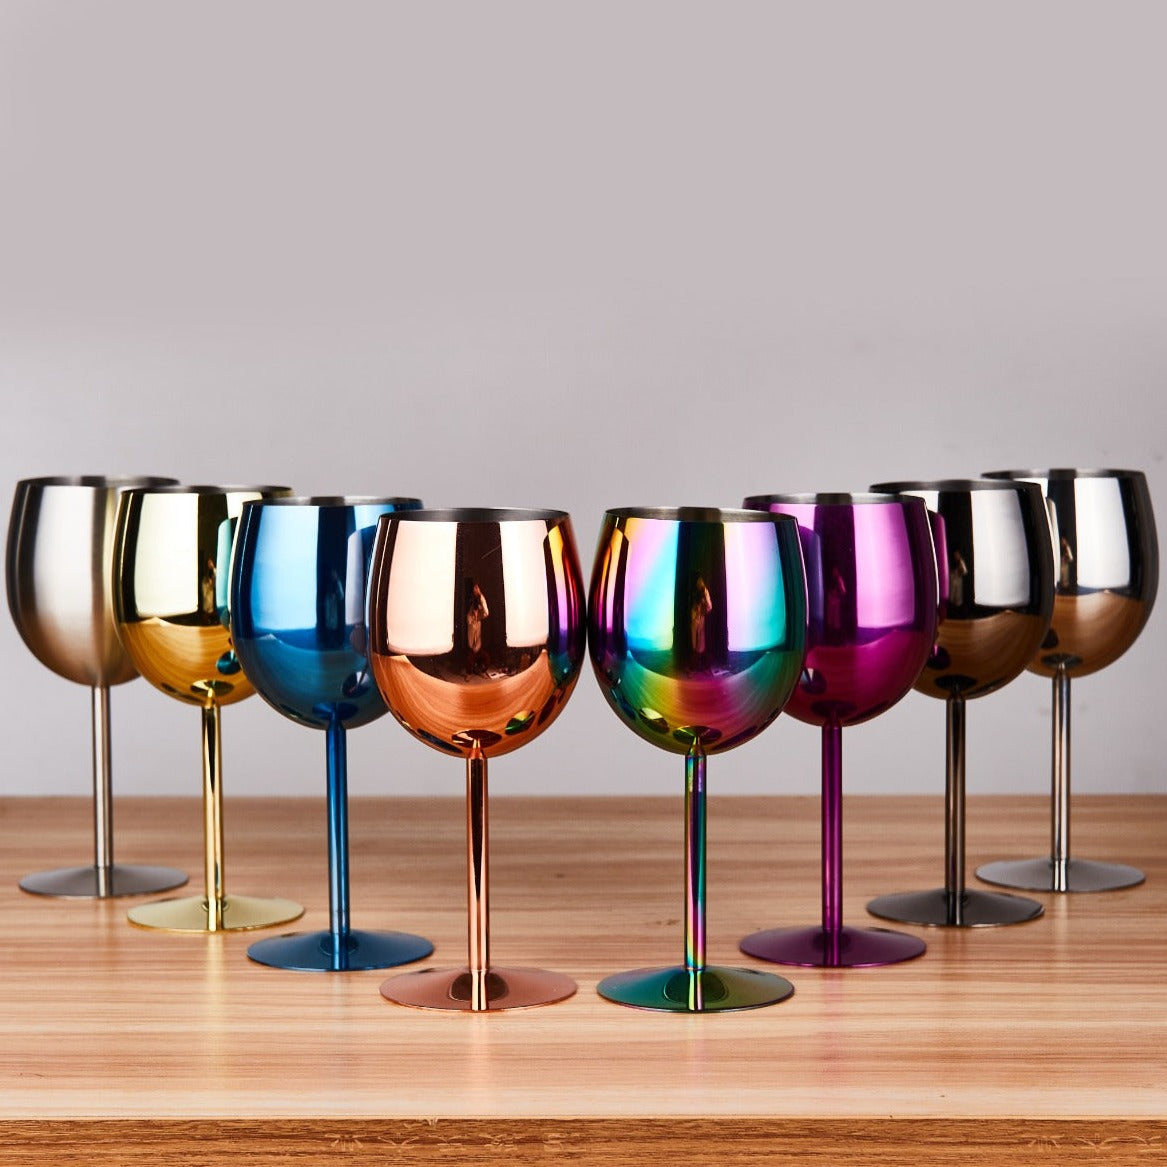 Stainless Steel Wine Glasses - The Stainless Sipper